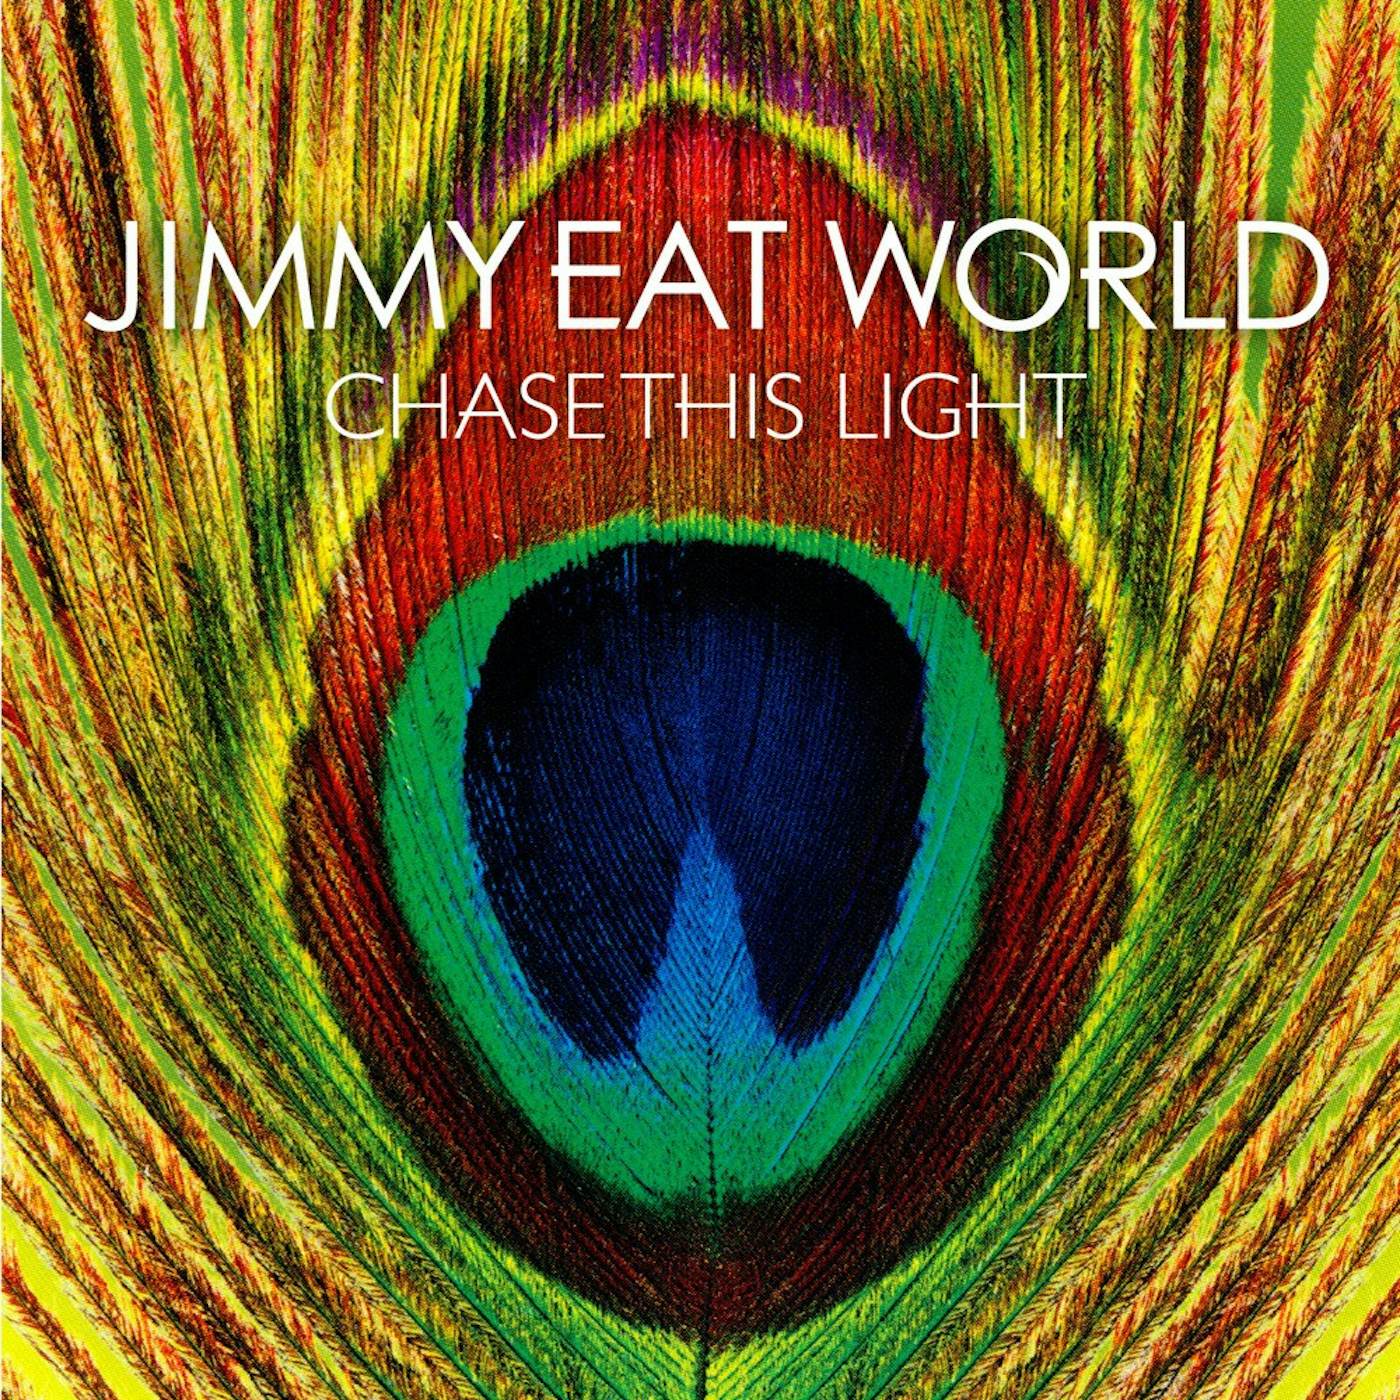 Jimmy Eat World Chase This Light Vinyl Record